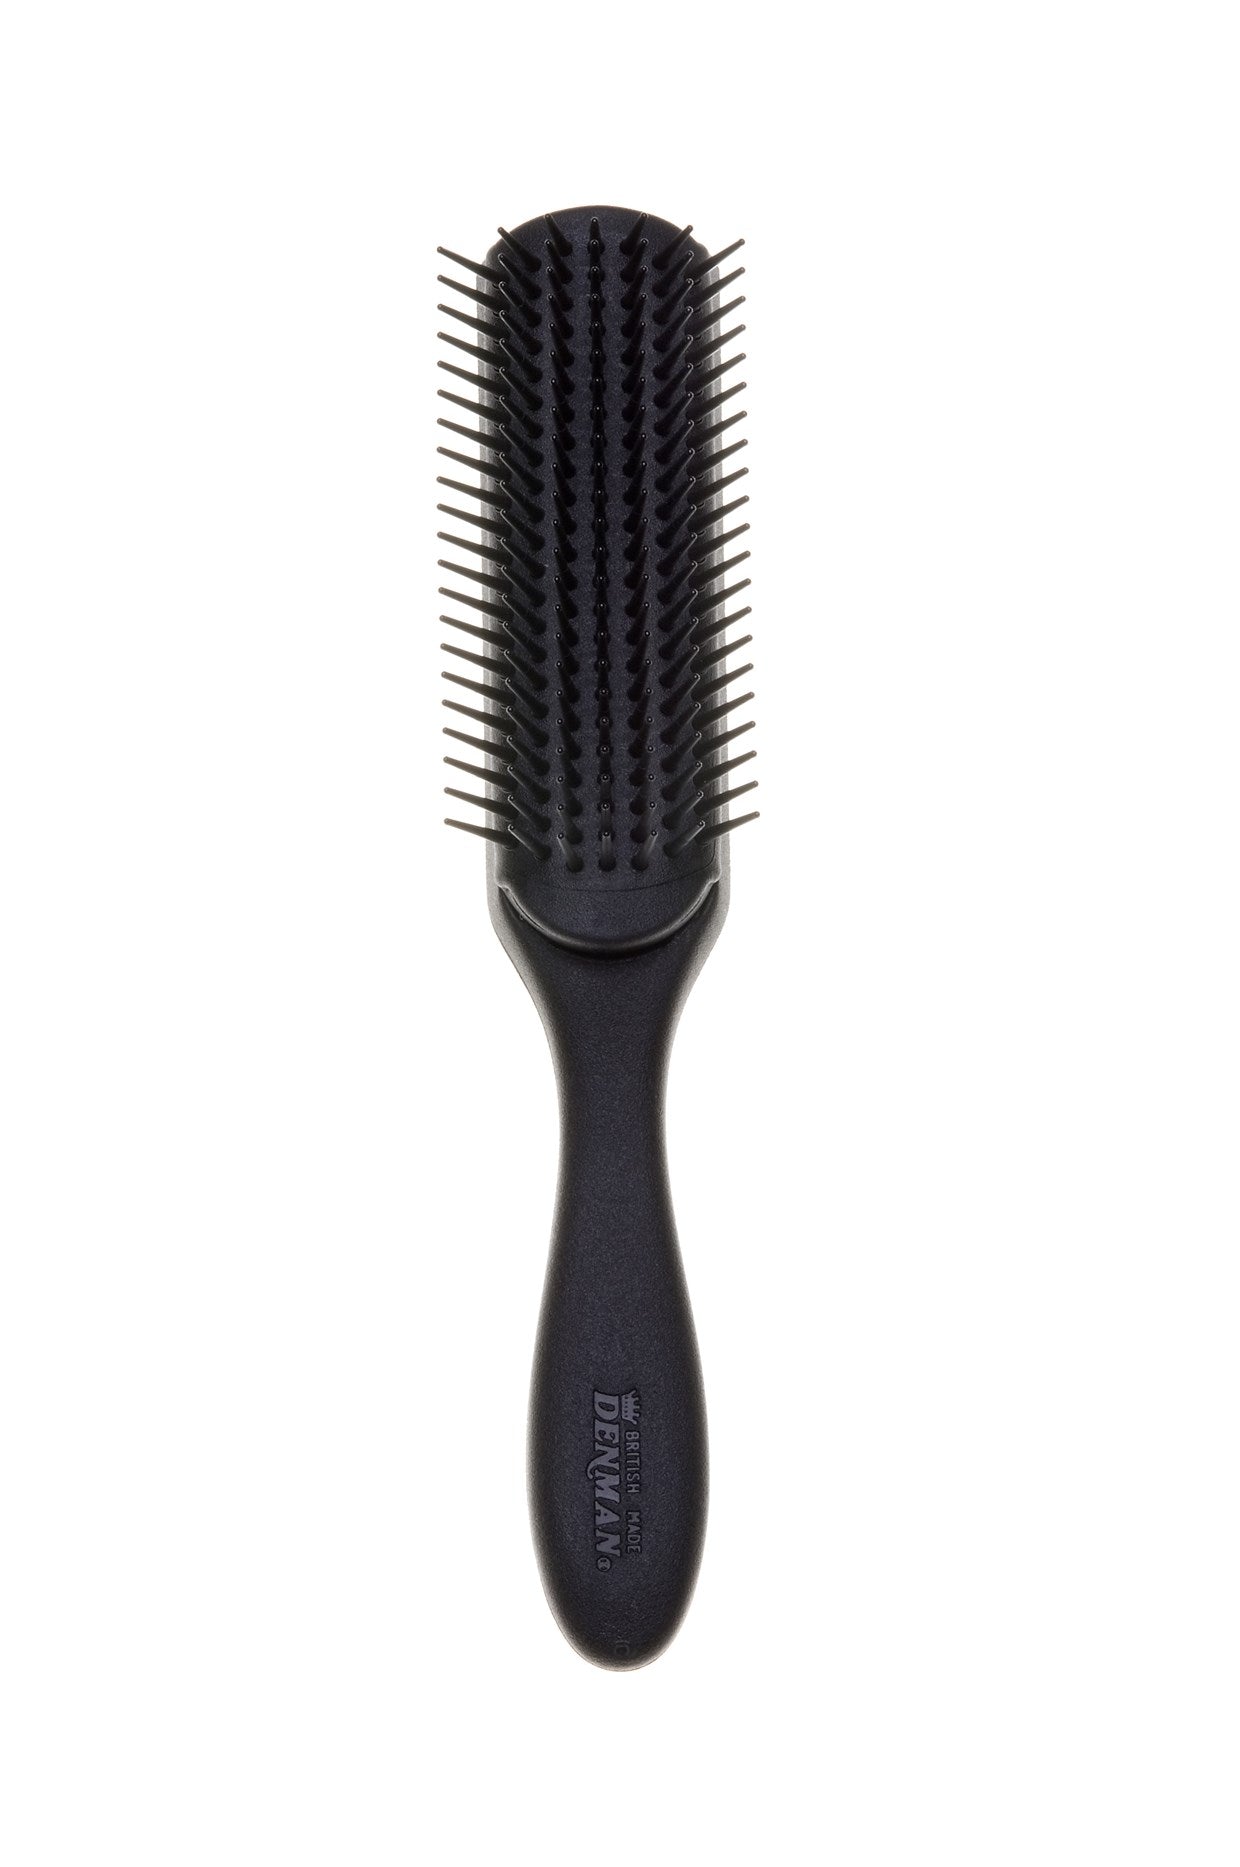 ''Jack Dean by Denman Curly HAIR Brush D3 (All Black) 7 Row Styling Brush for Detangling, Separating,